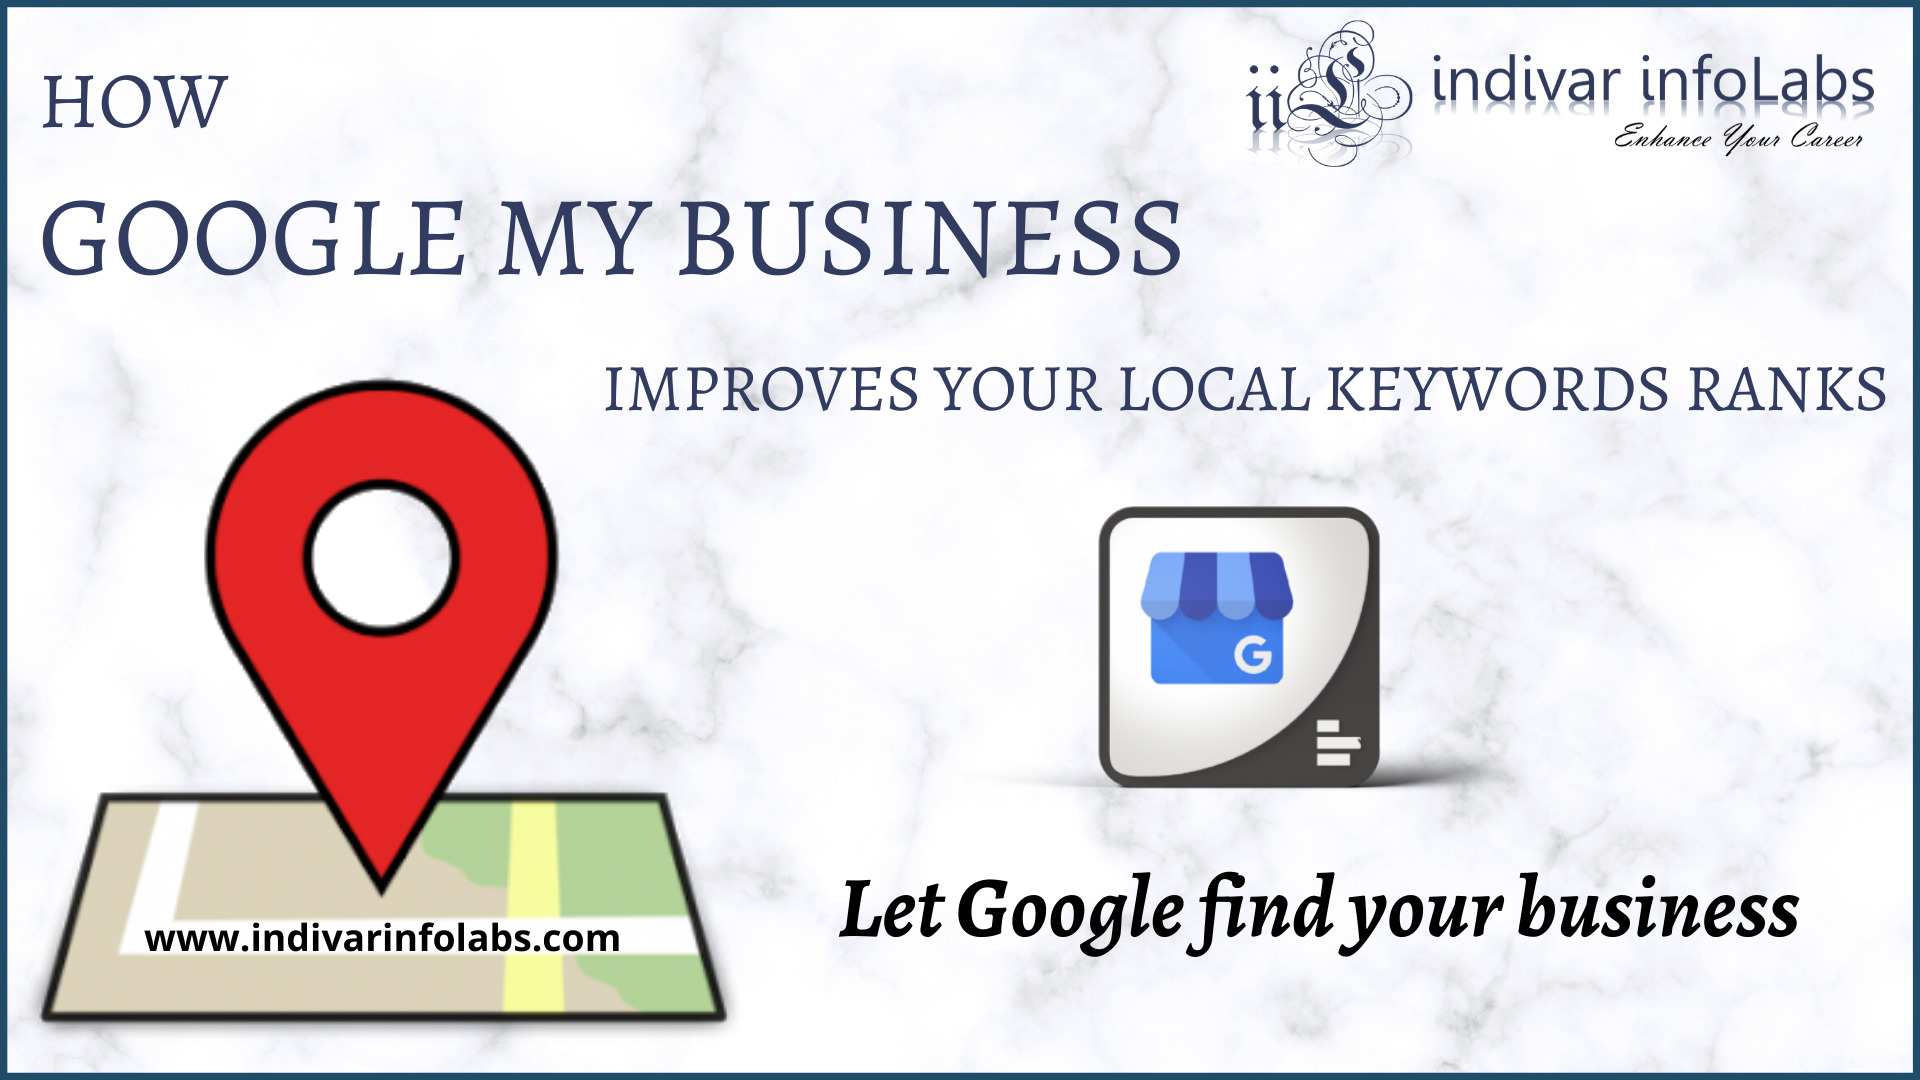 How Google My Business Improves Your Local Keywords Ranks?